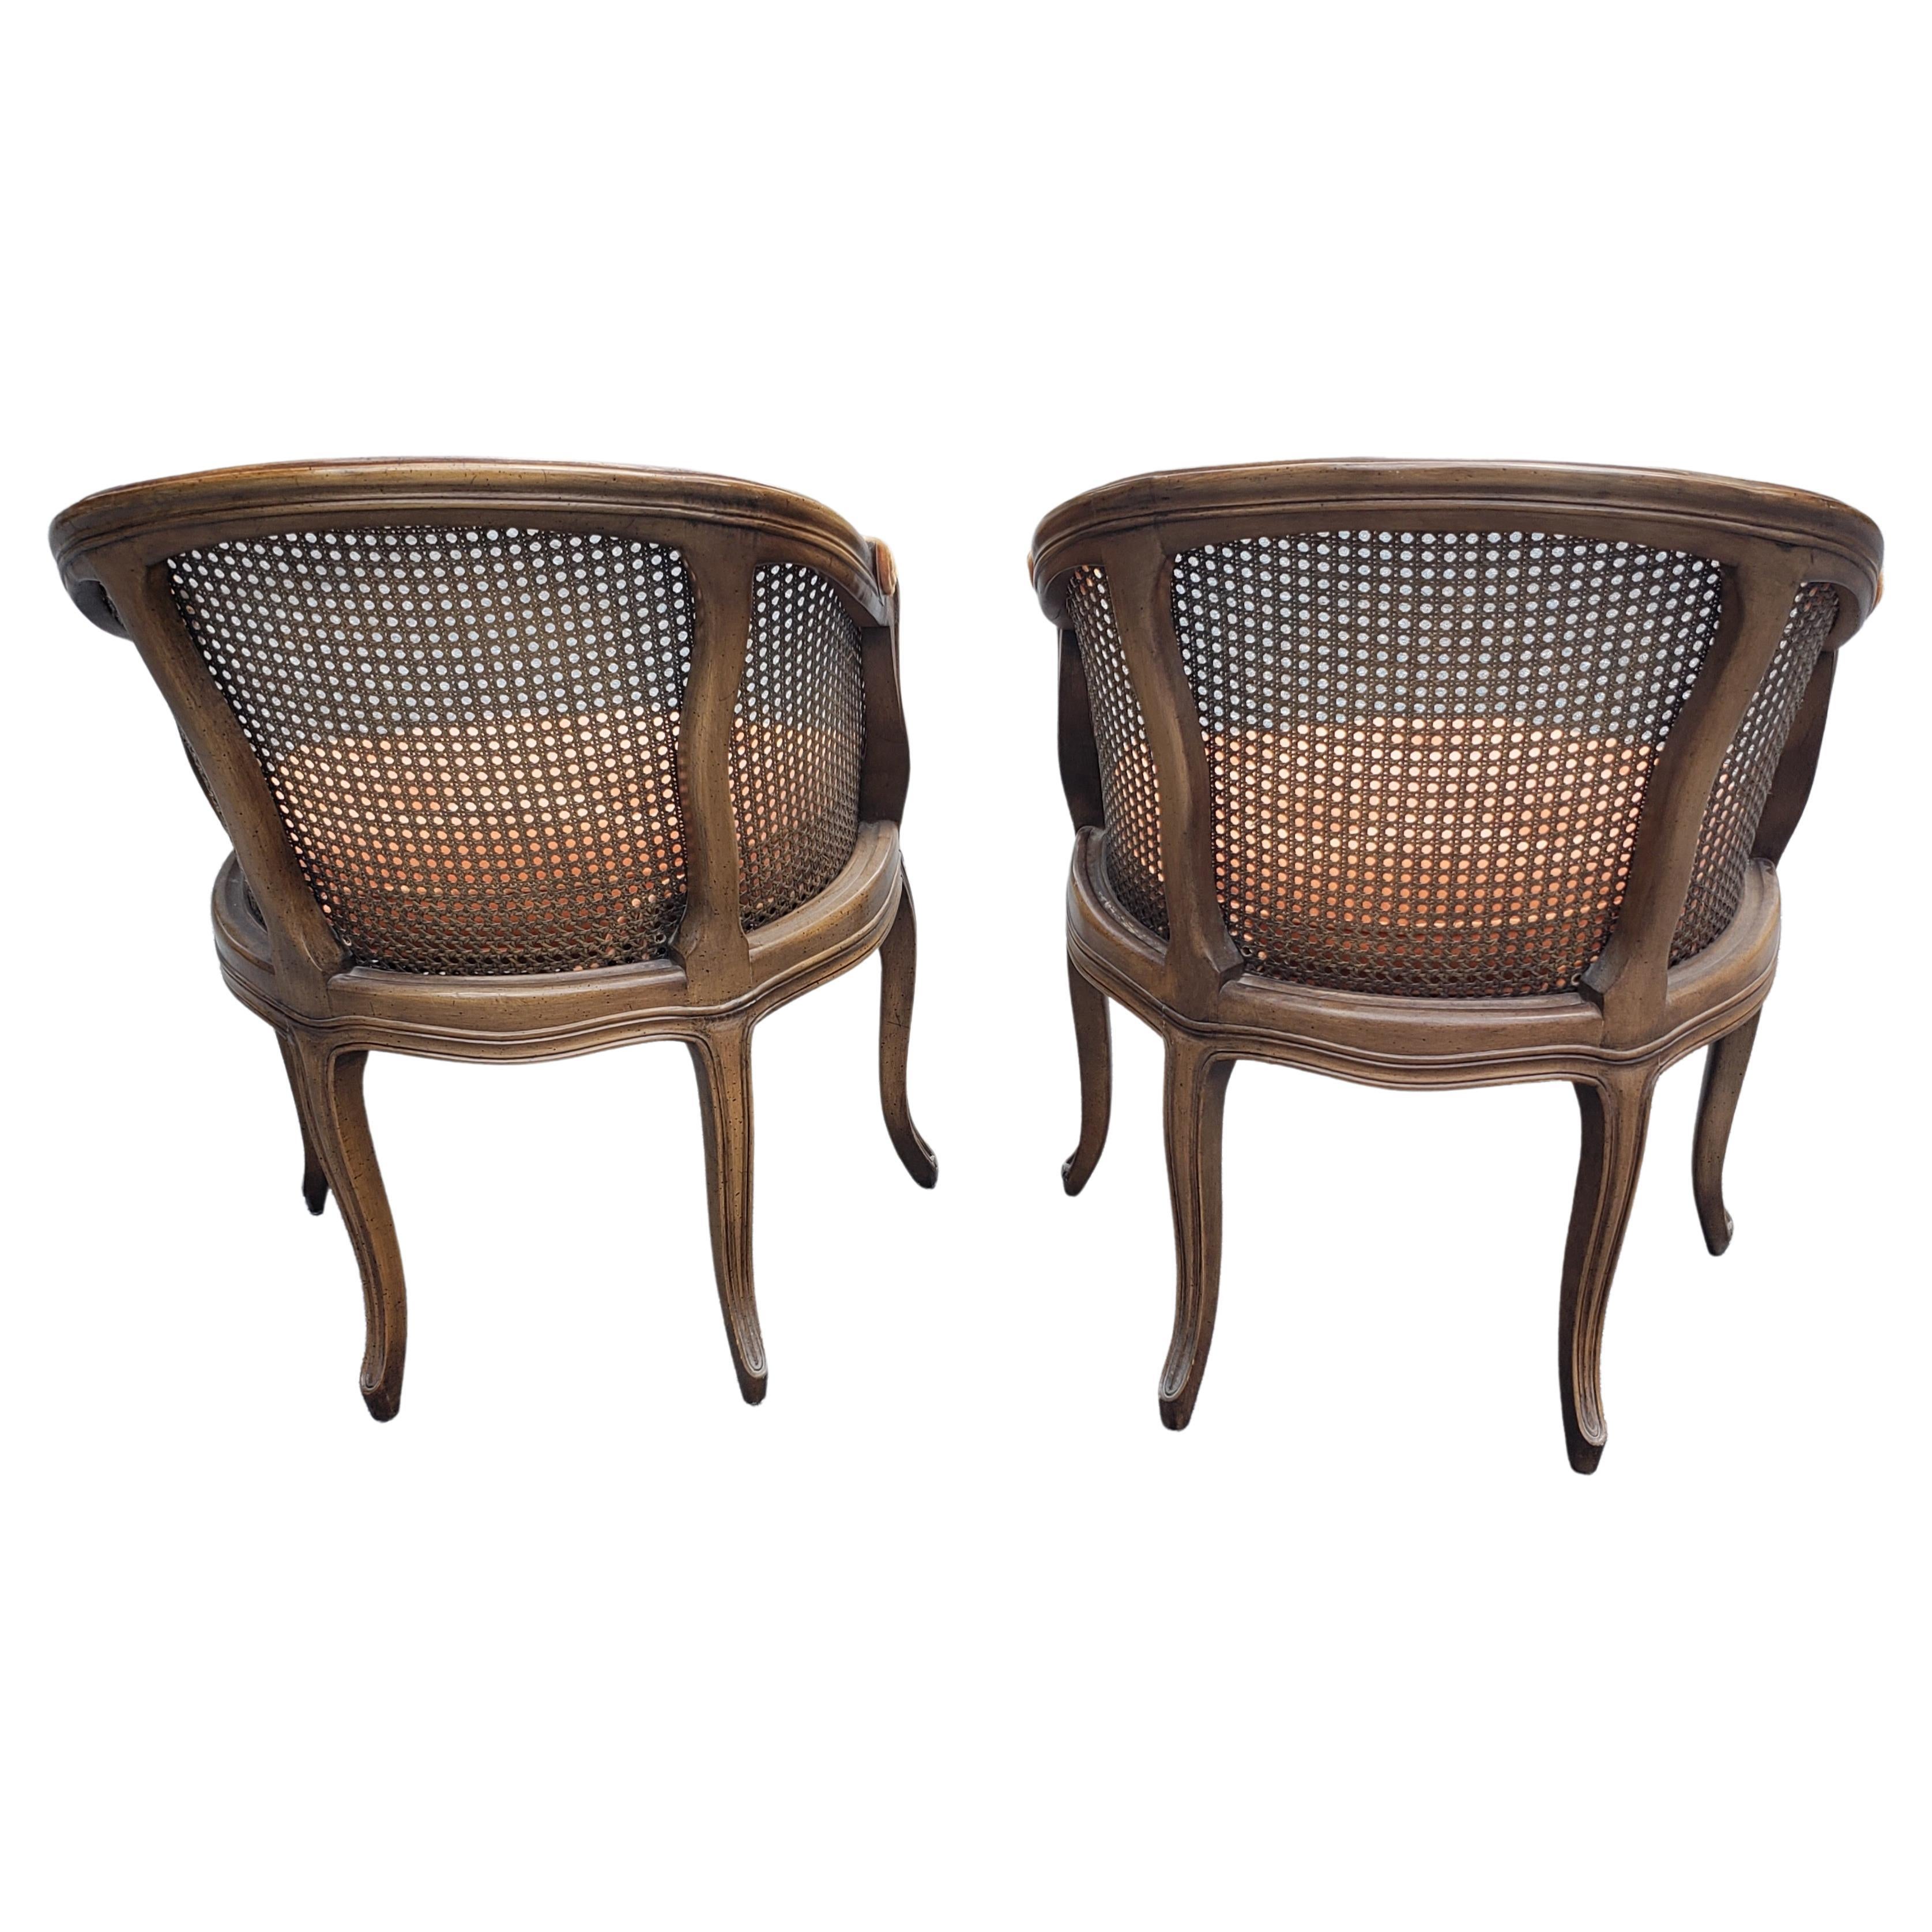 Upholstery French Country Walnut and Cane Tufted Upholstered Seat Chairs, a Pair